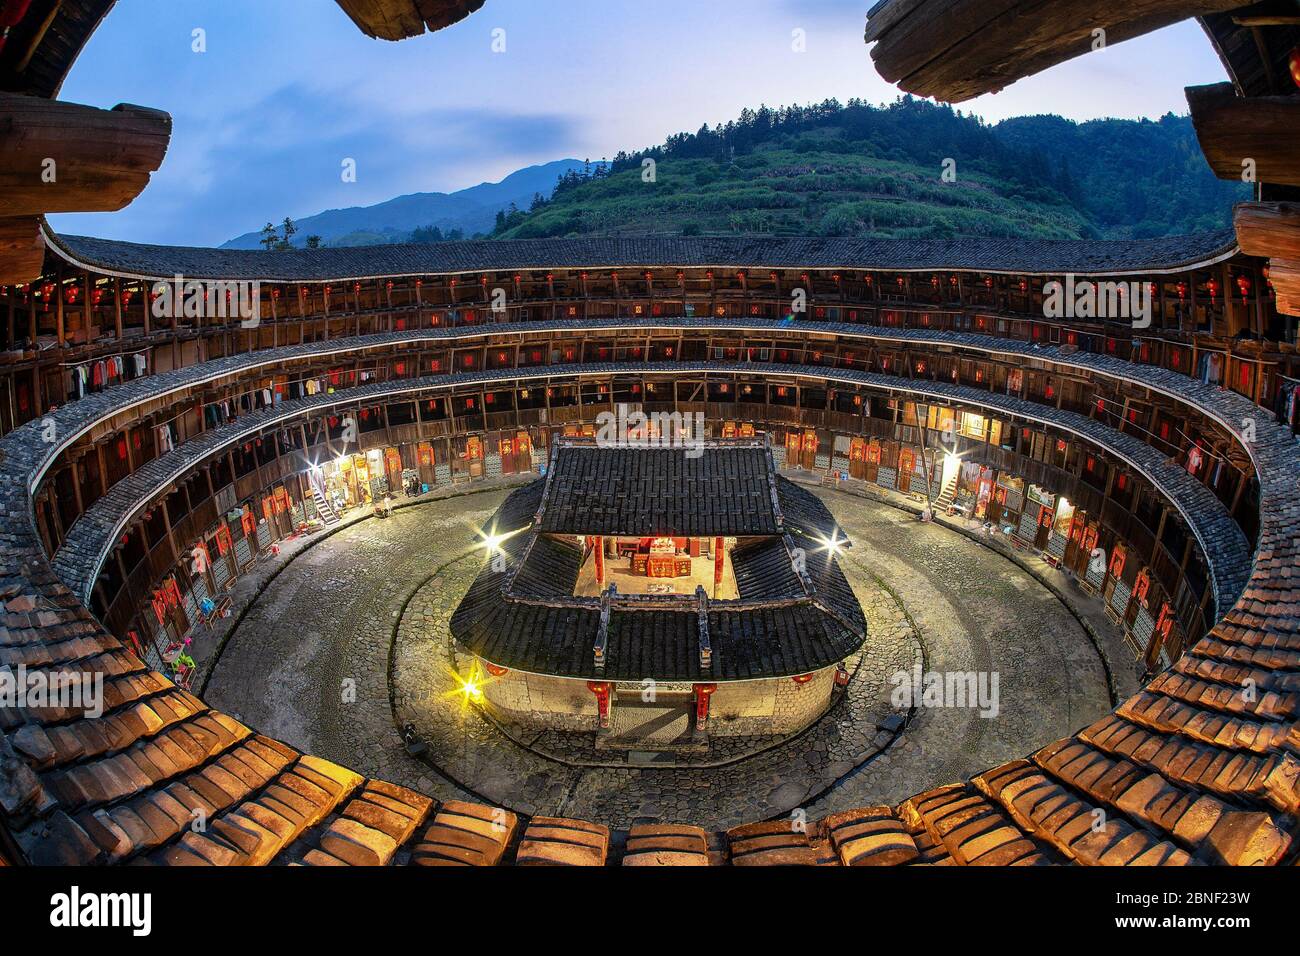 --FILE--In this unlocated photo, the inside view of Fujian tulou, a Chinese rural dwellings unique to the Hakka in the mountainous areas in southeaste Stock Photo